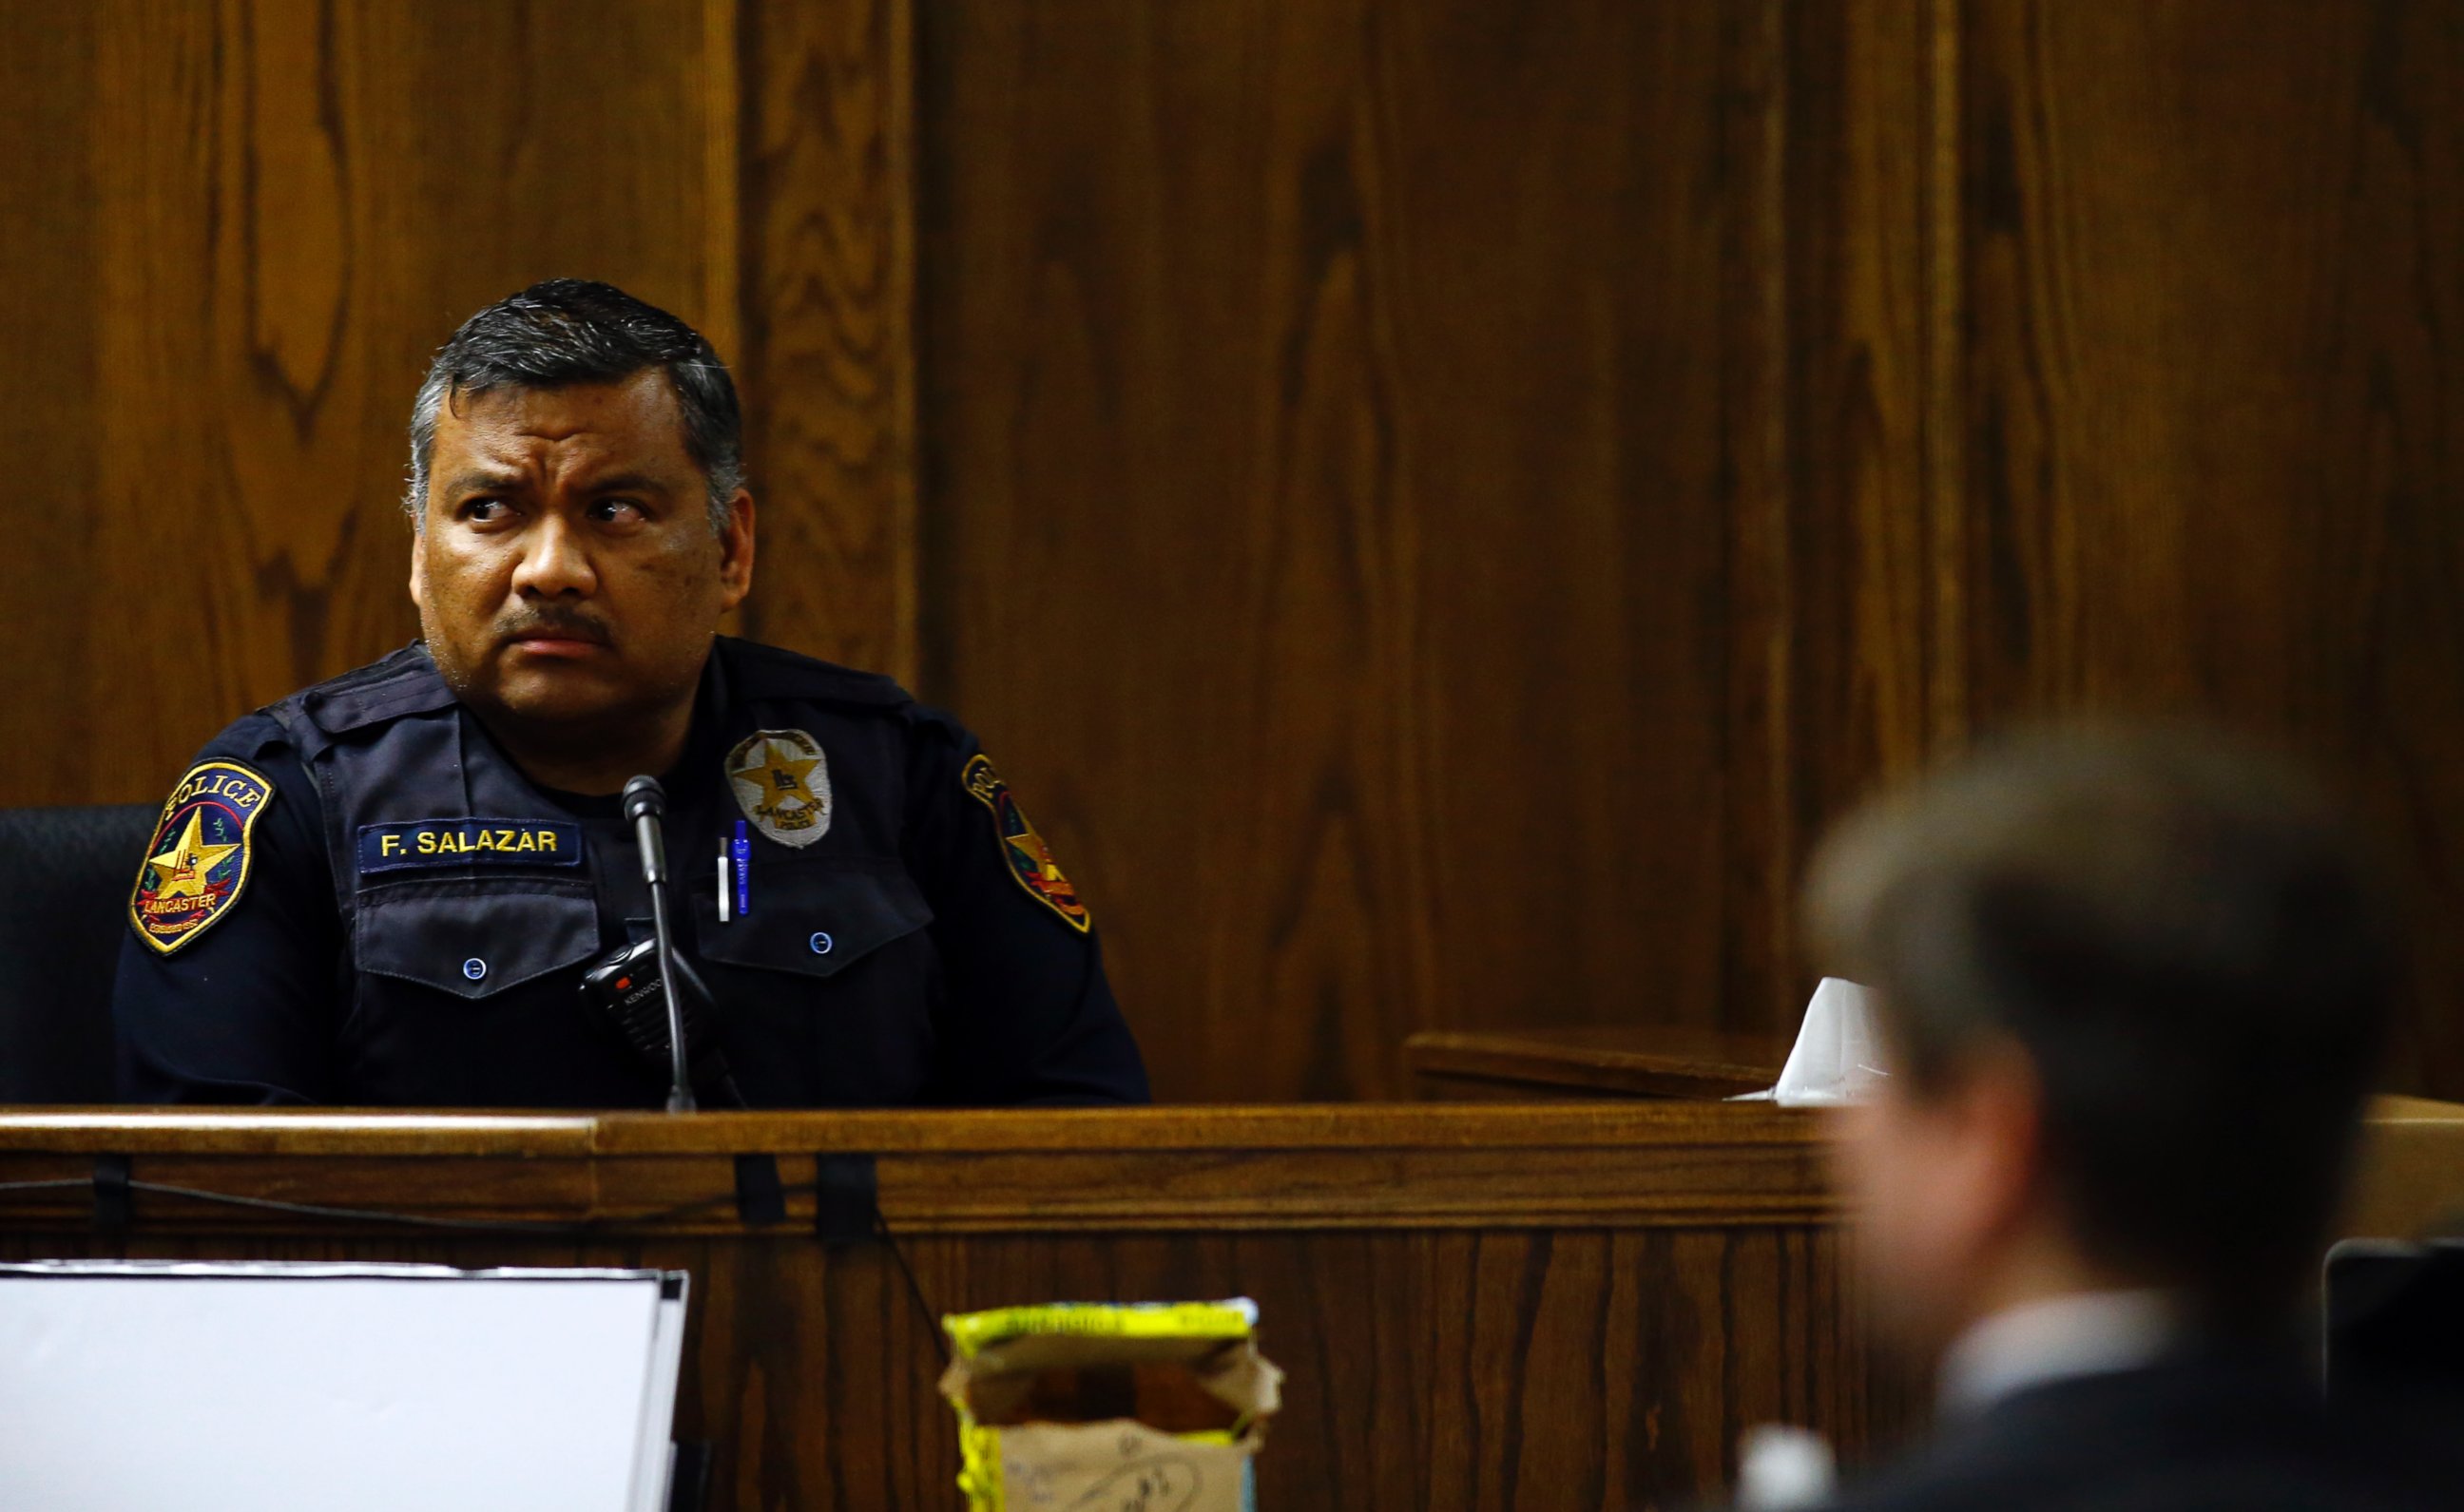 PHOTO: Lancaster police officer Flavio Salazar listens to a question from the defense during the capital murder trial of former Marine Cpl. Eddie Ray Routh in Stephenville, Texas on Feb. 17, 2015.